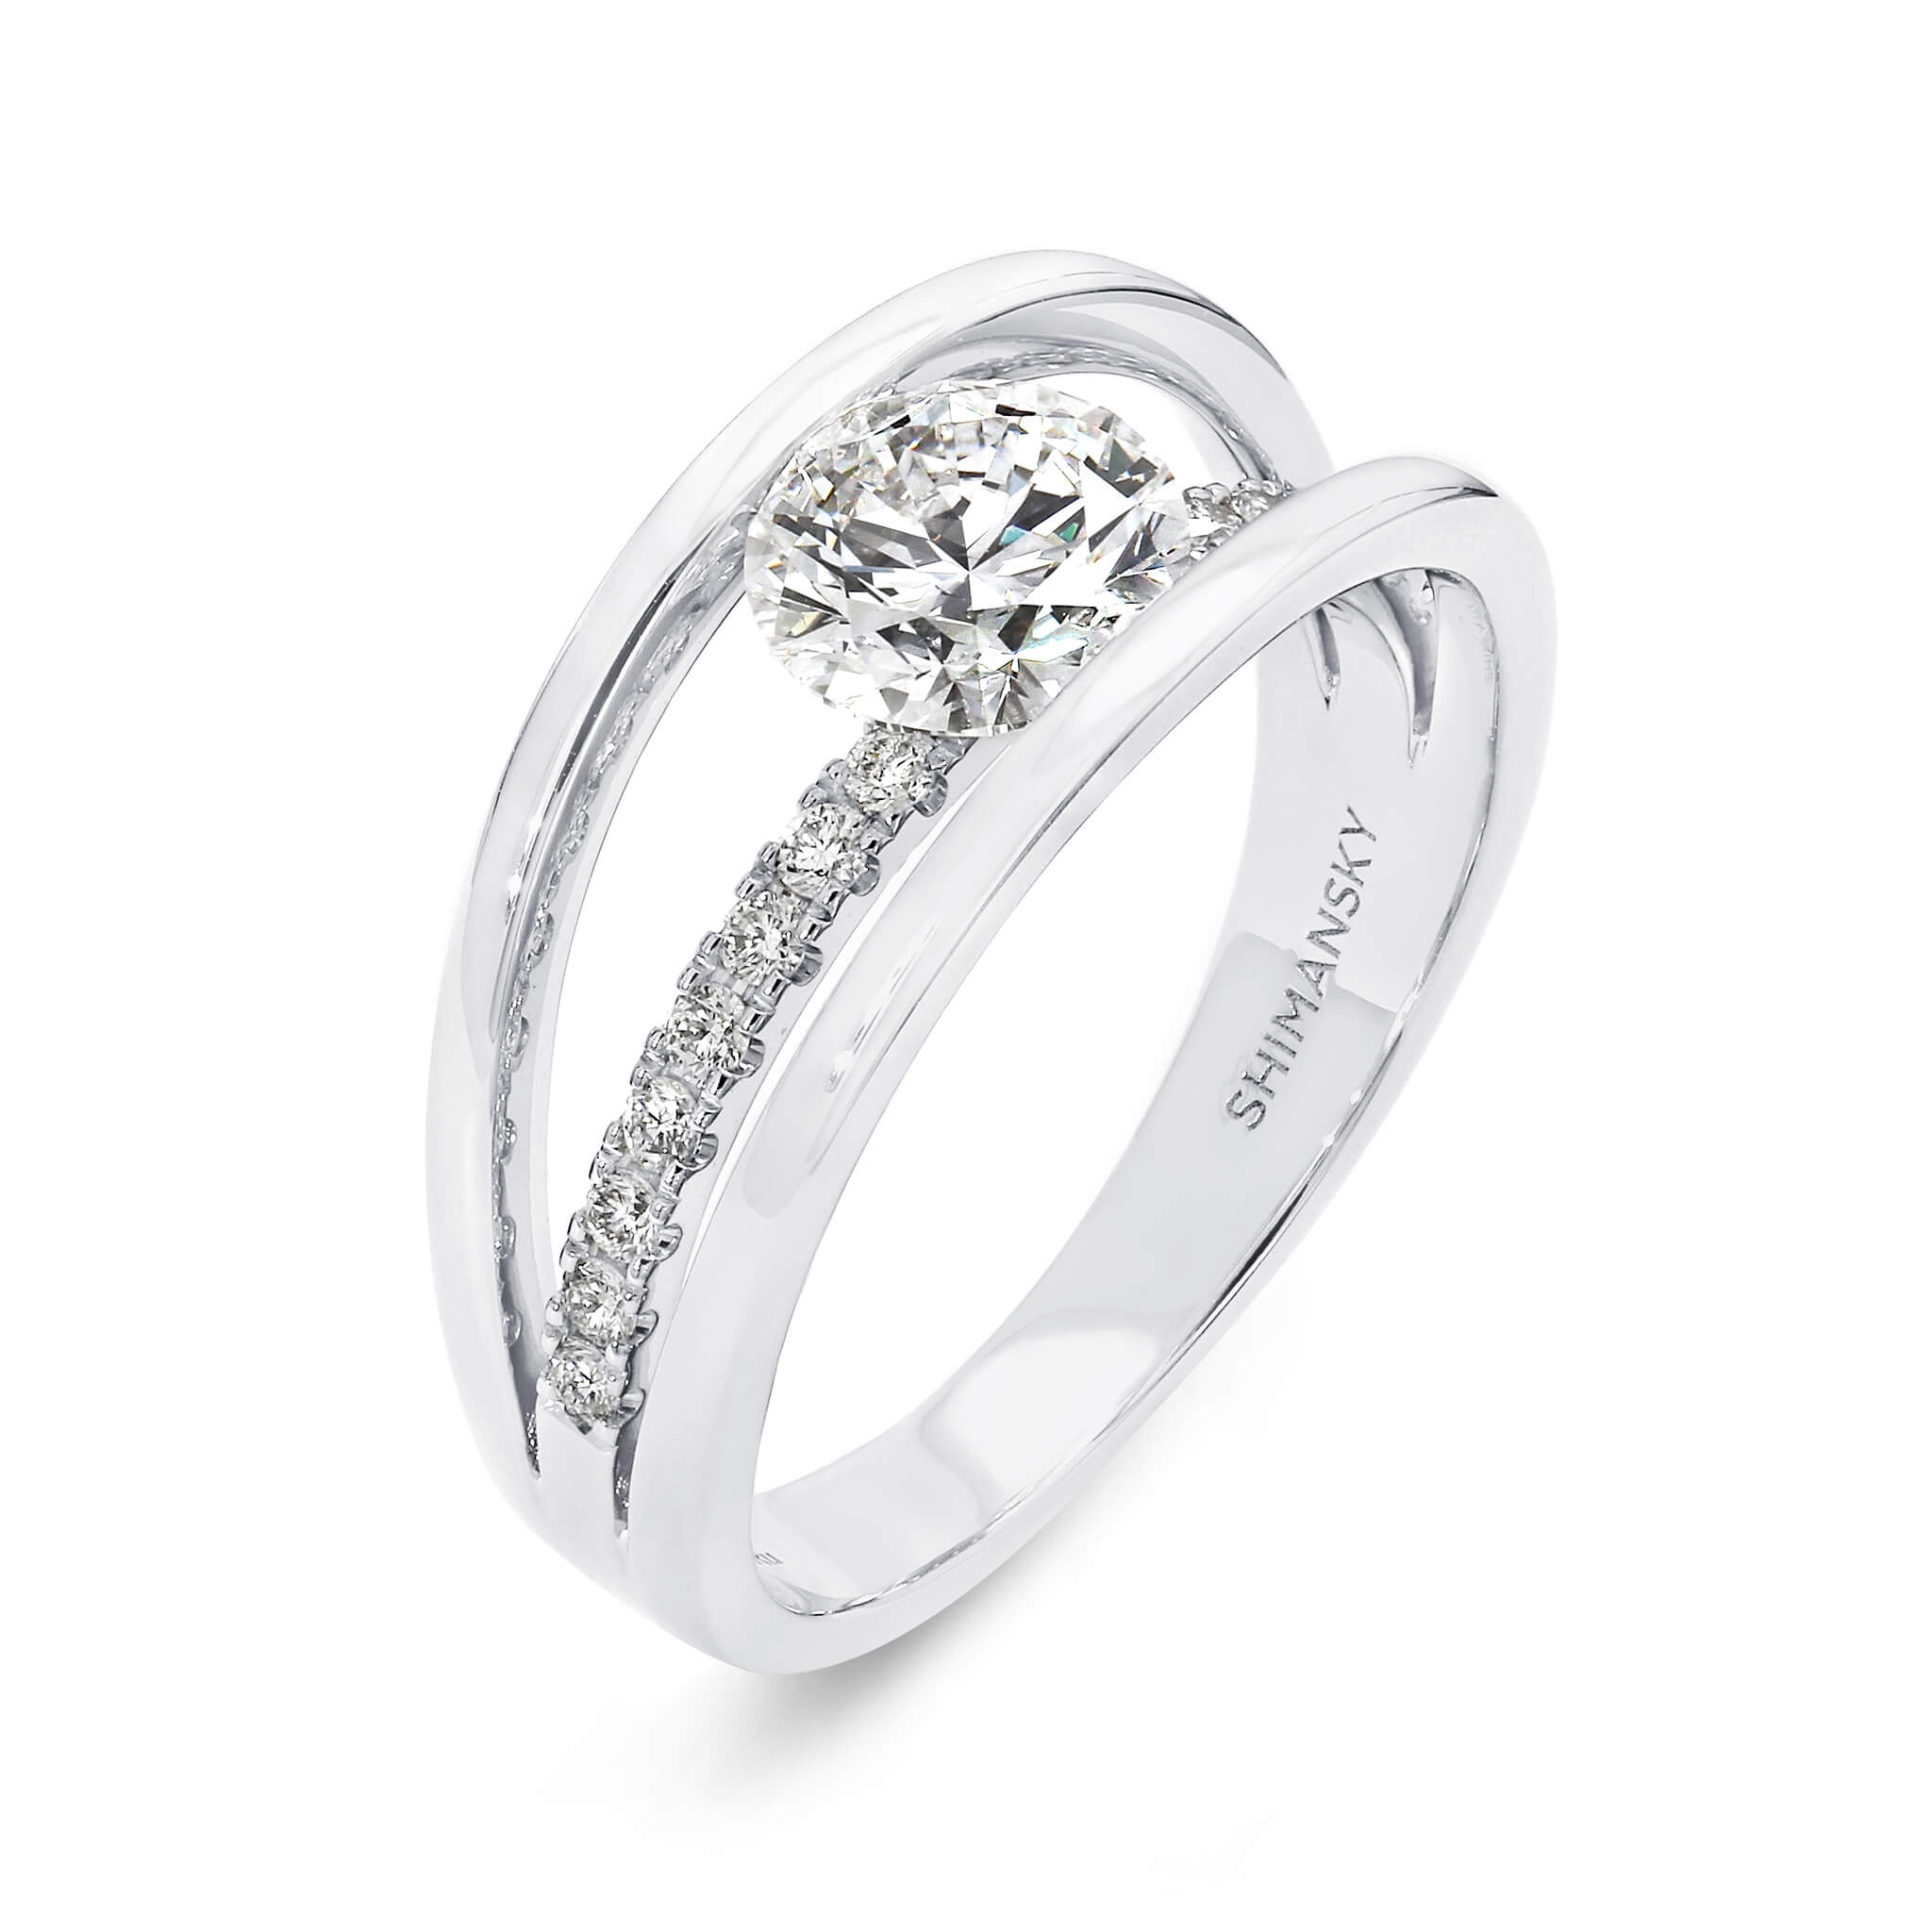 Evolym Diamond Engagement Ring 1.00 Carat in 18K White Gold 3D View